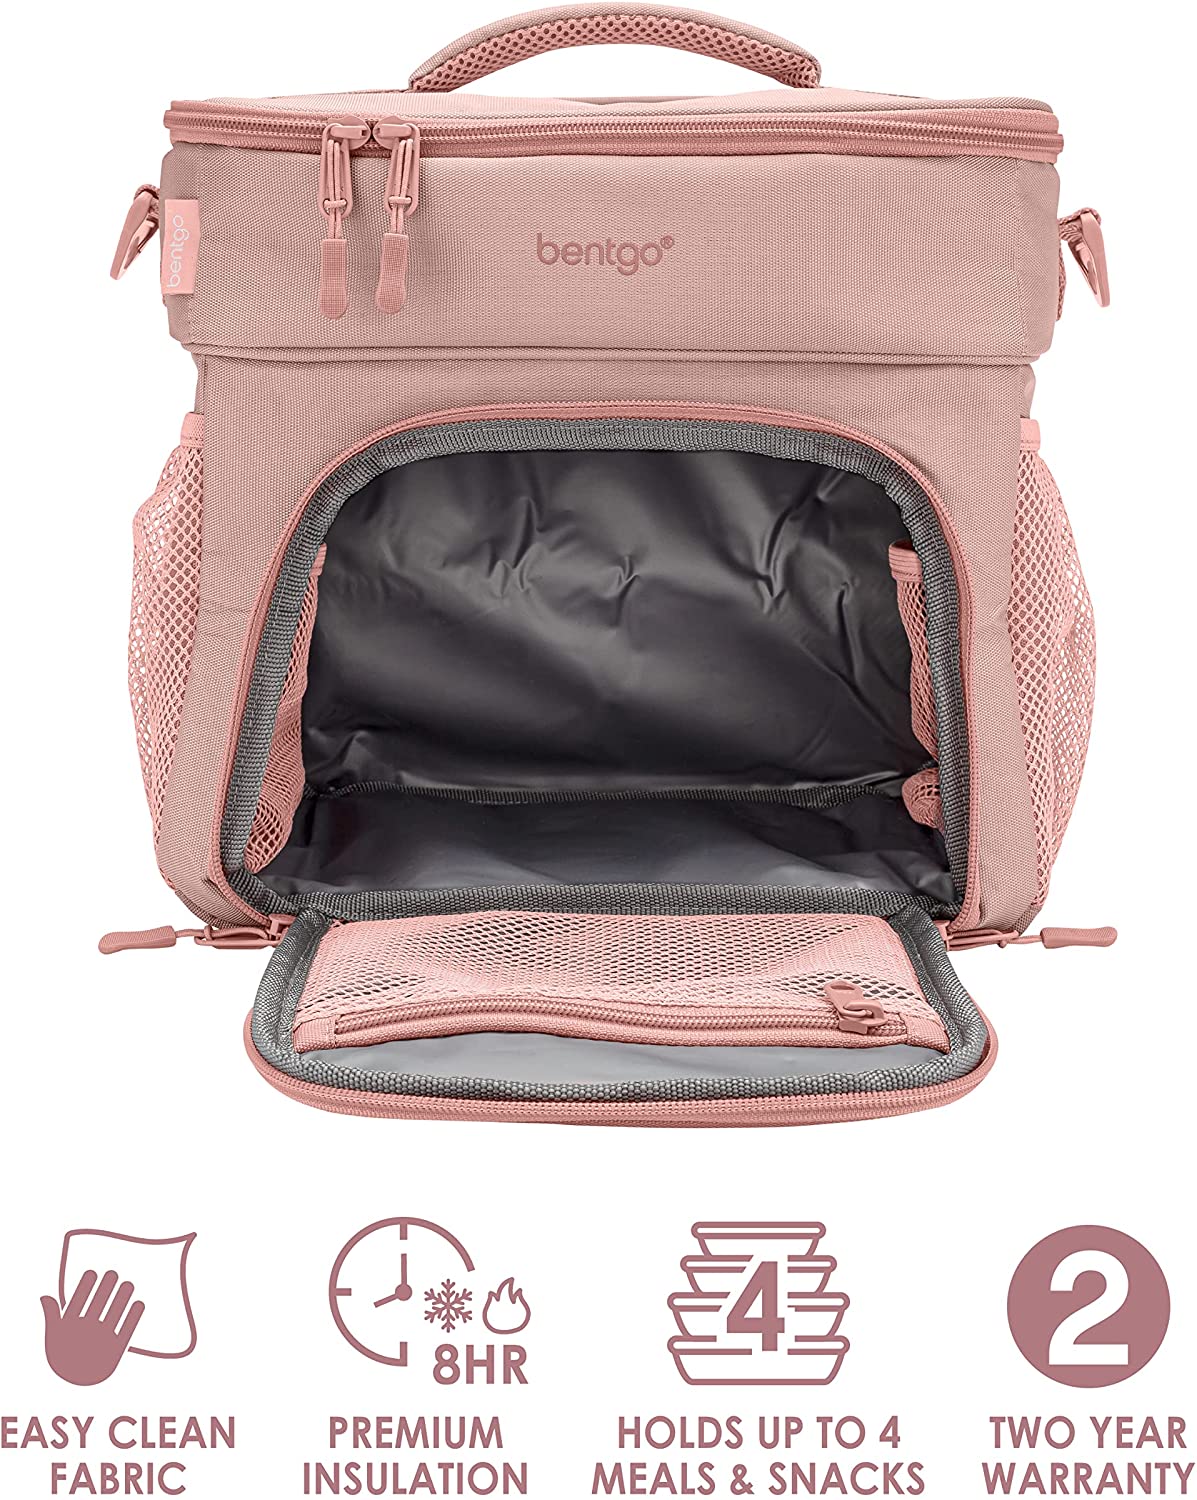 https://bigbigmart.com/wp-content/uploads/2022/07/Bentgo%C2%AE-Prep-Deluxe-Multimeal-Bag-Premium-Insulation-up-to-8-Hrs-with-Water-Resistant-Exterior-Interior-Extra-Large-Lunch-Bag-Holds-4-Meals-Snacks-Great-for-All-Day-Meal-Prep-Blush2.jpg